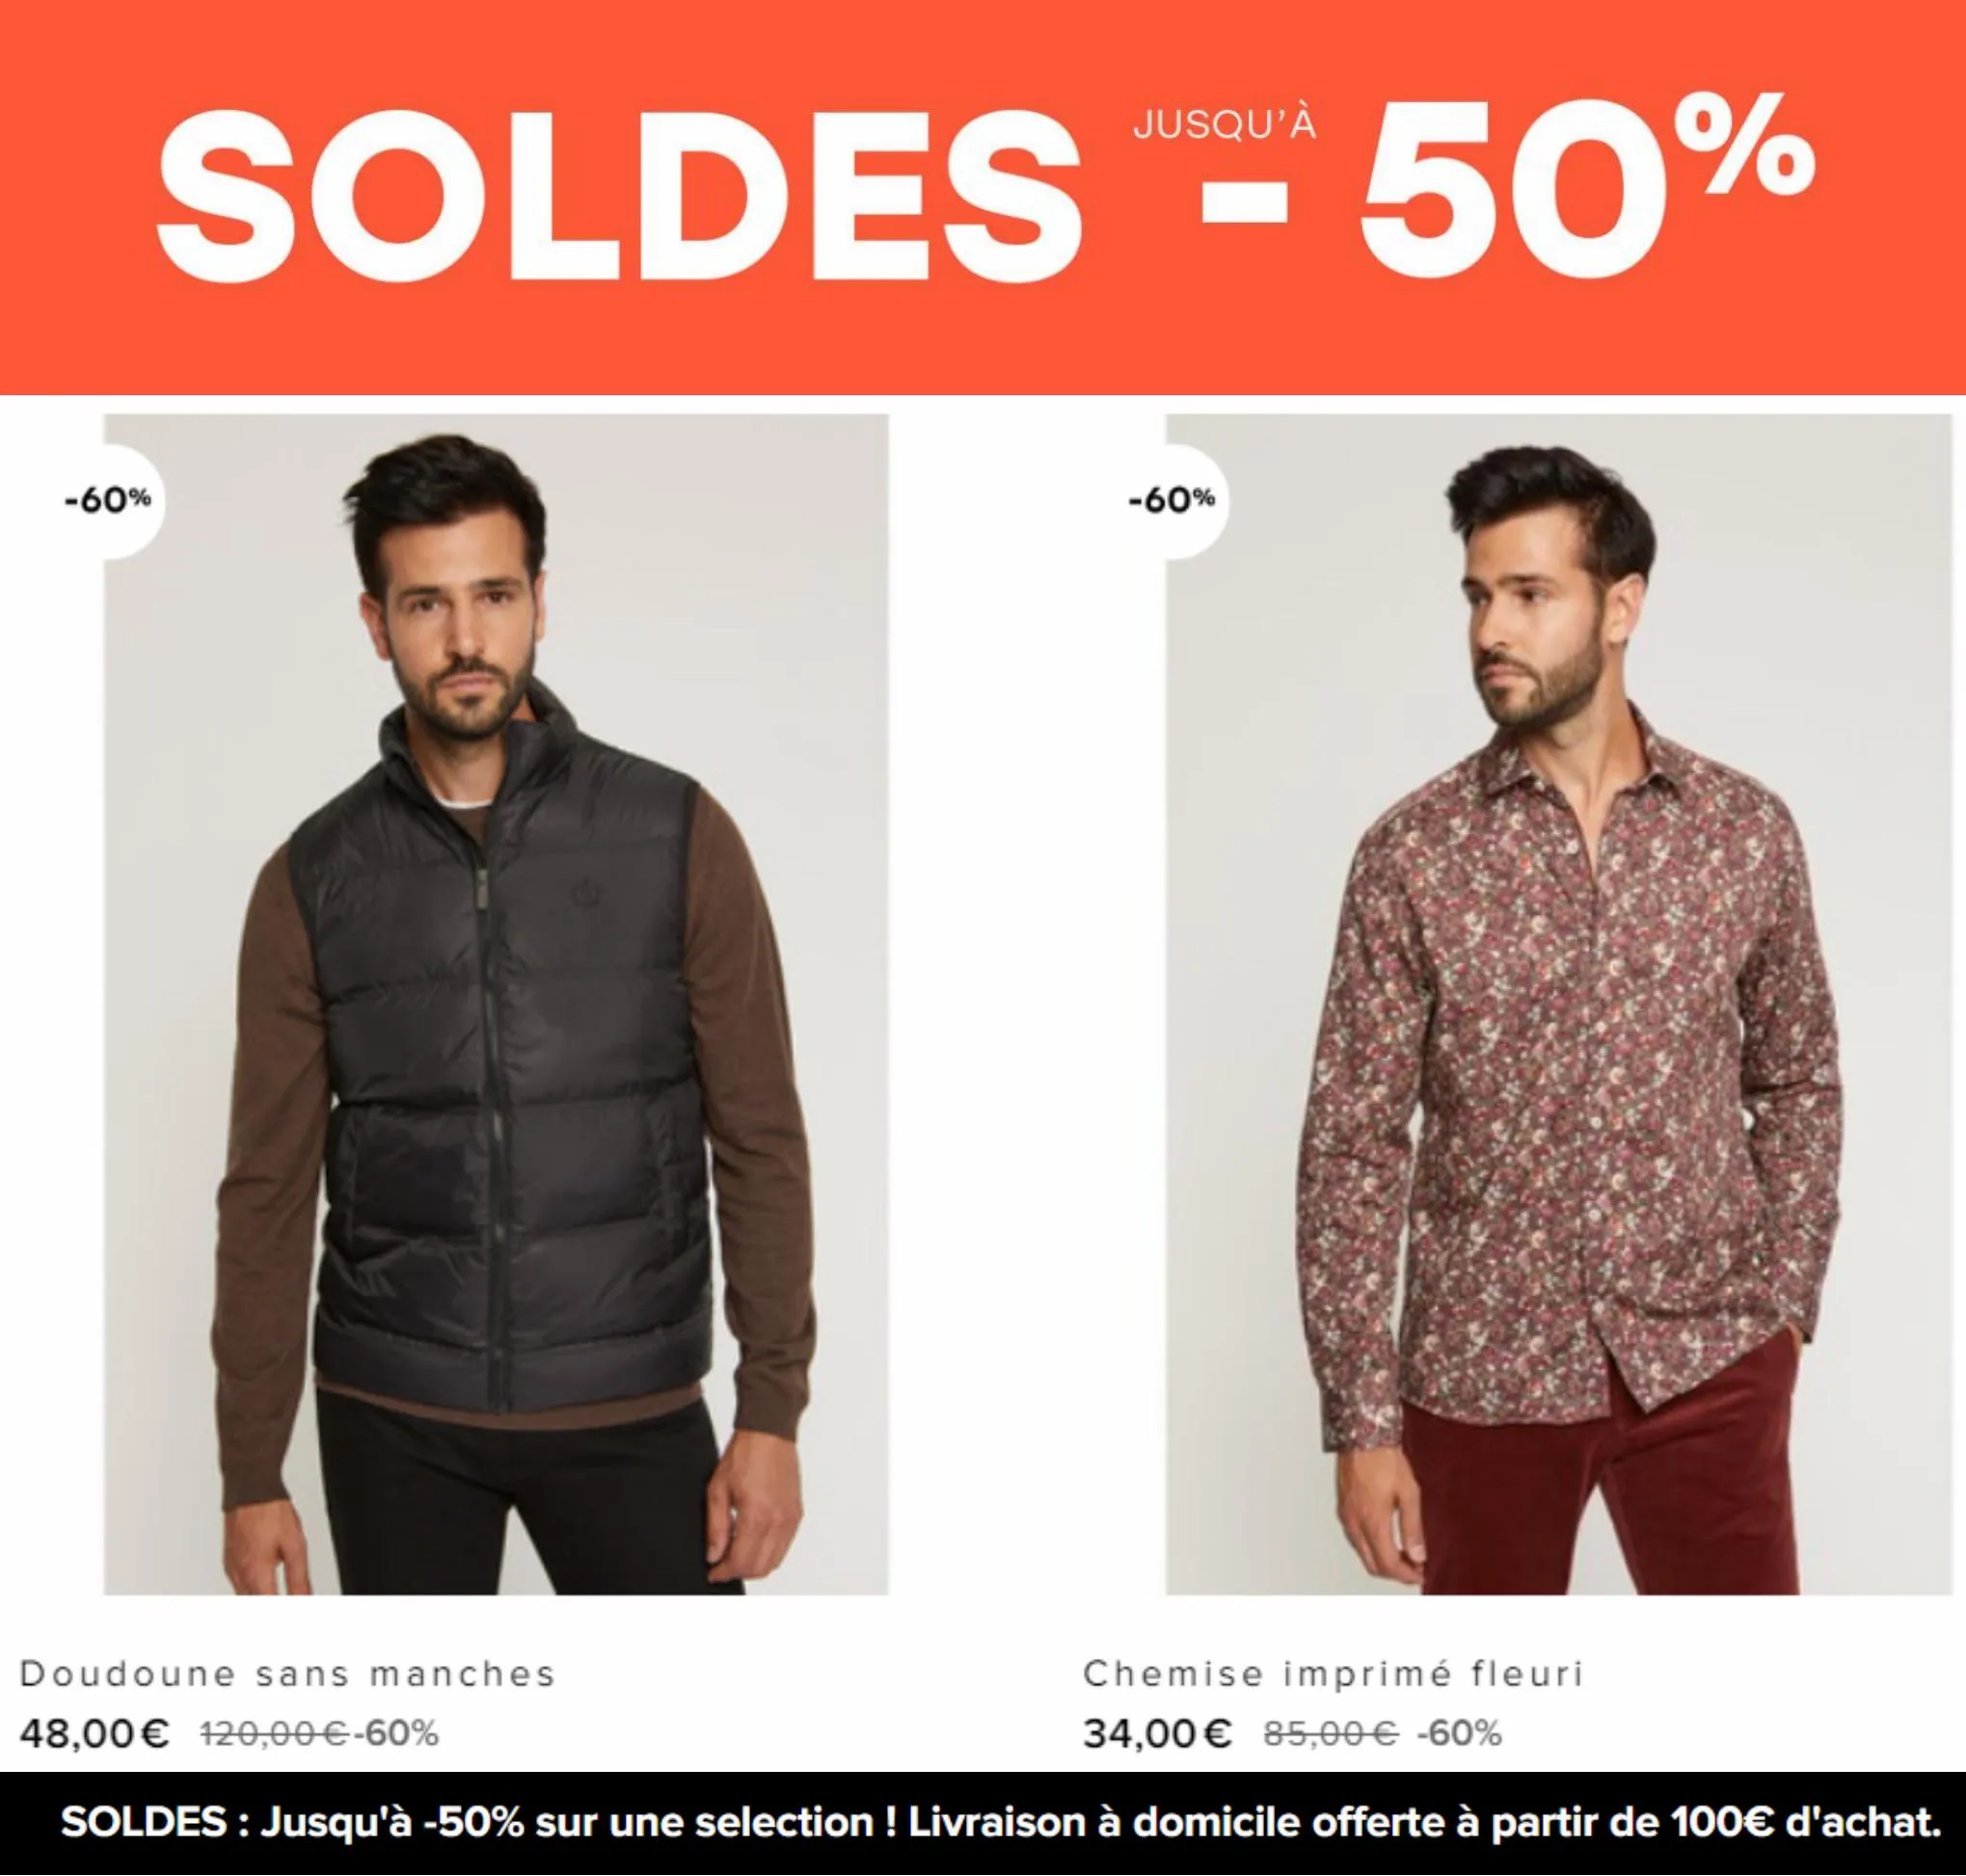 Catalogue Soldes -50% Homme, page 00004